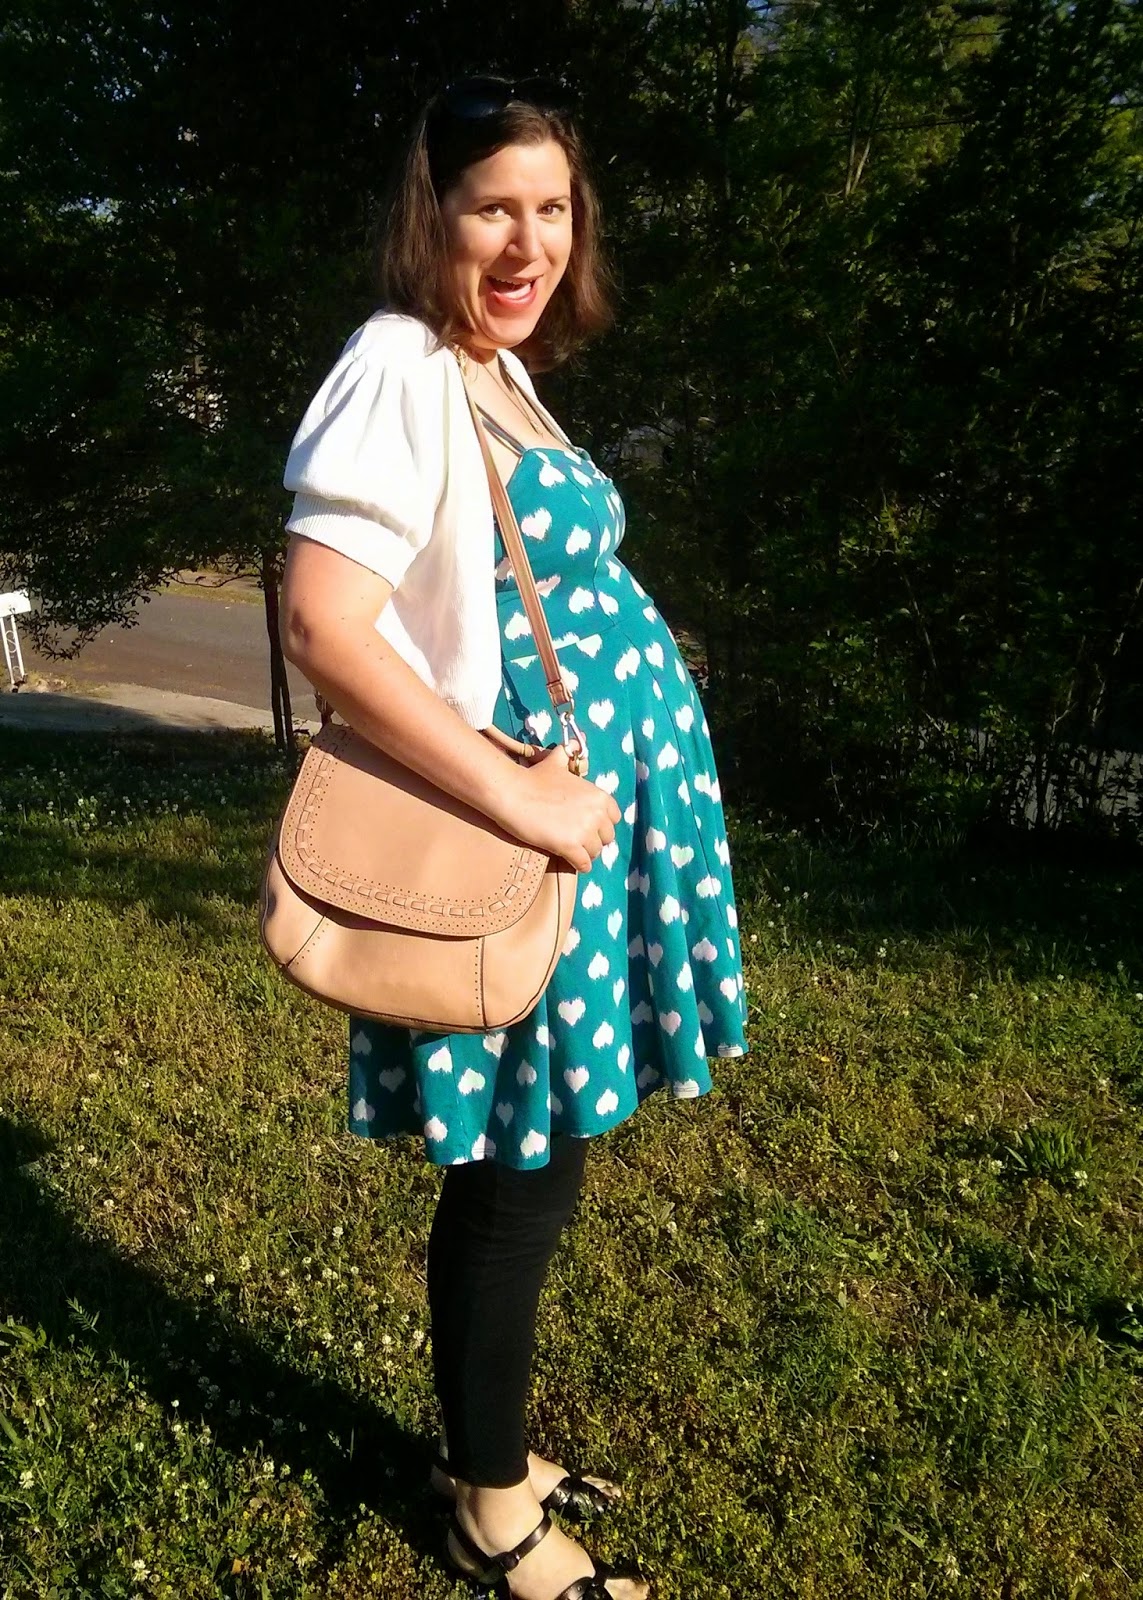 powder blue with polka dots (a hodgepodge): About to pop?